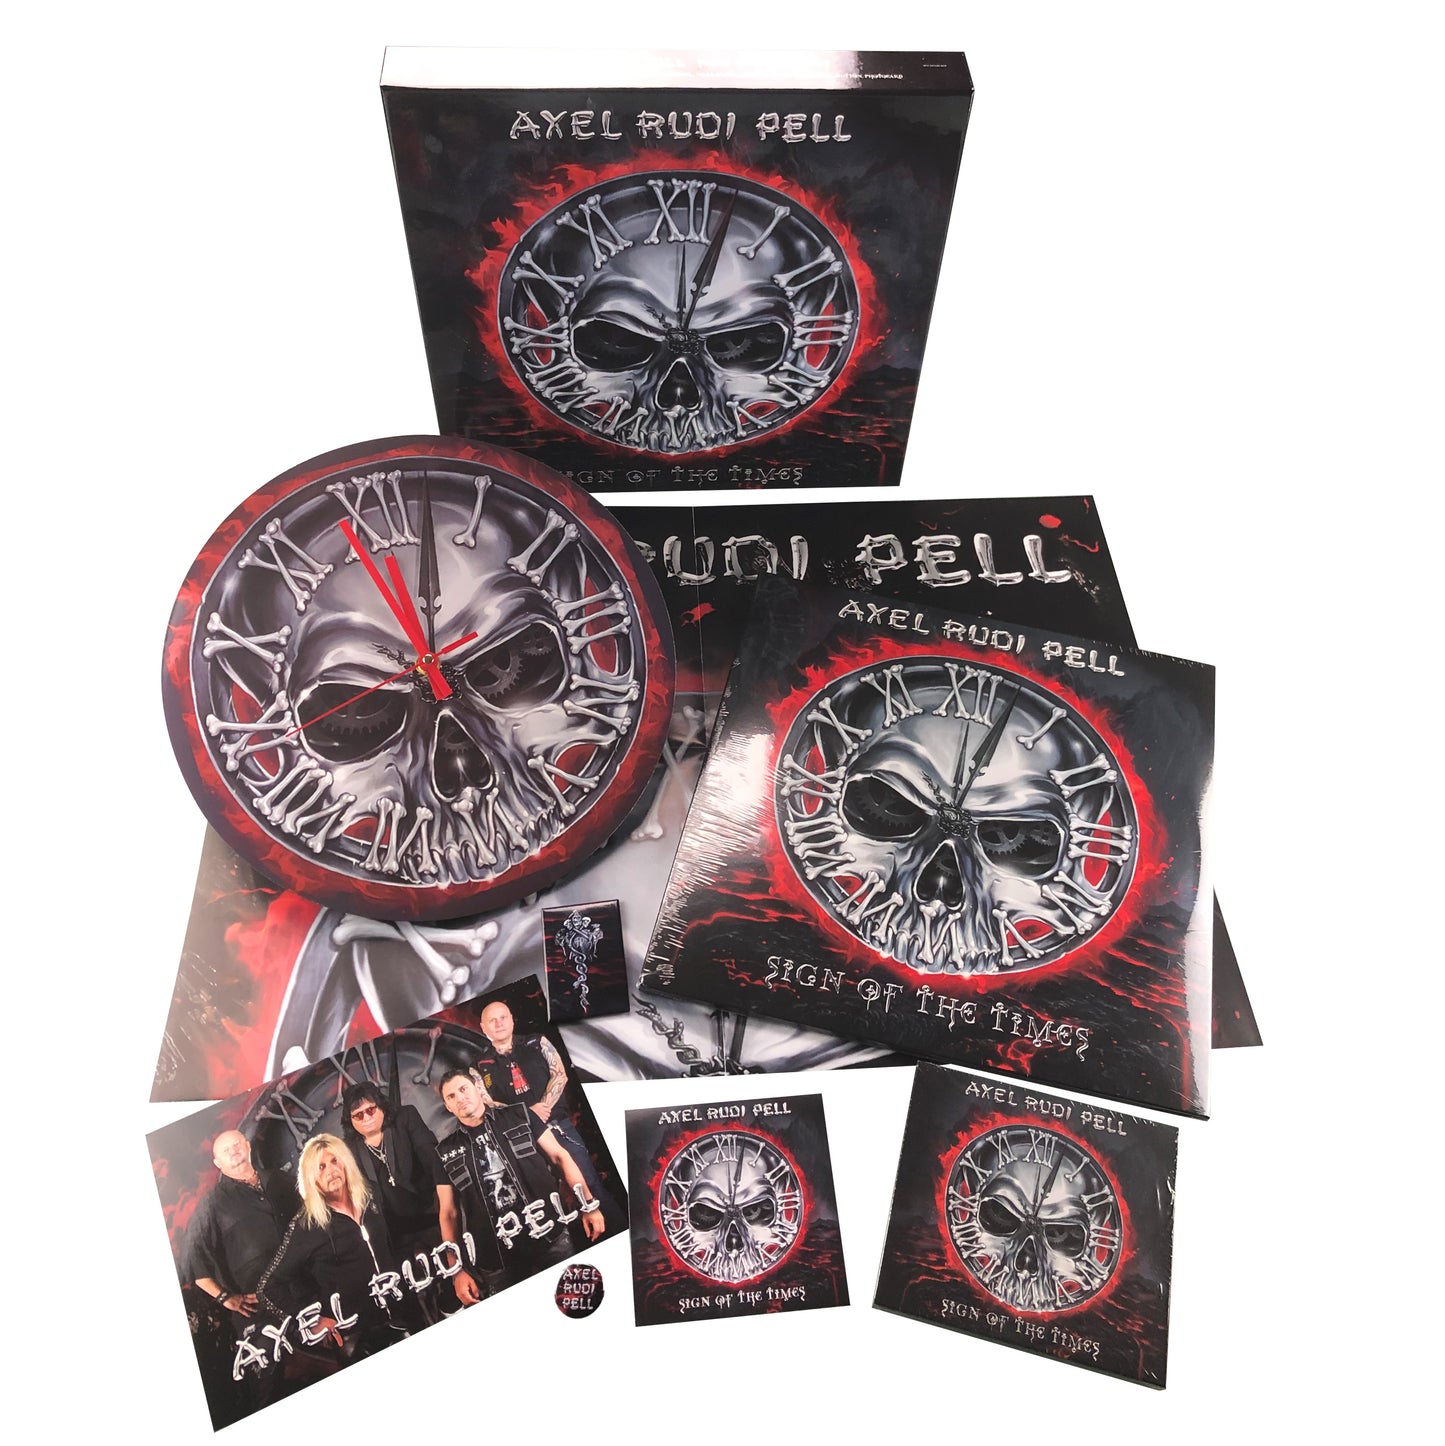 Axel Rudi Pell "Sign Of The Times" Box